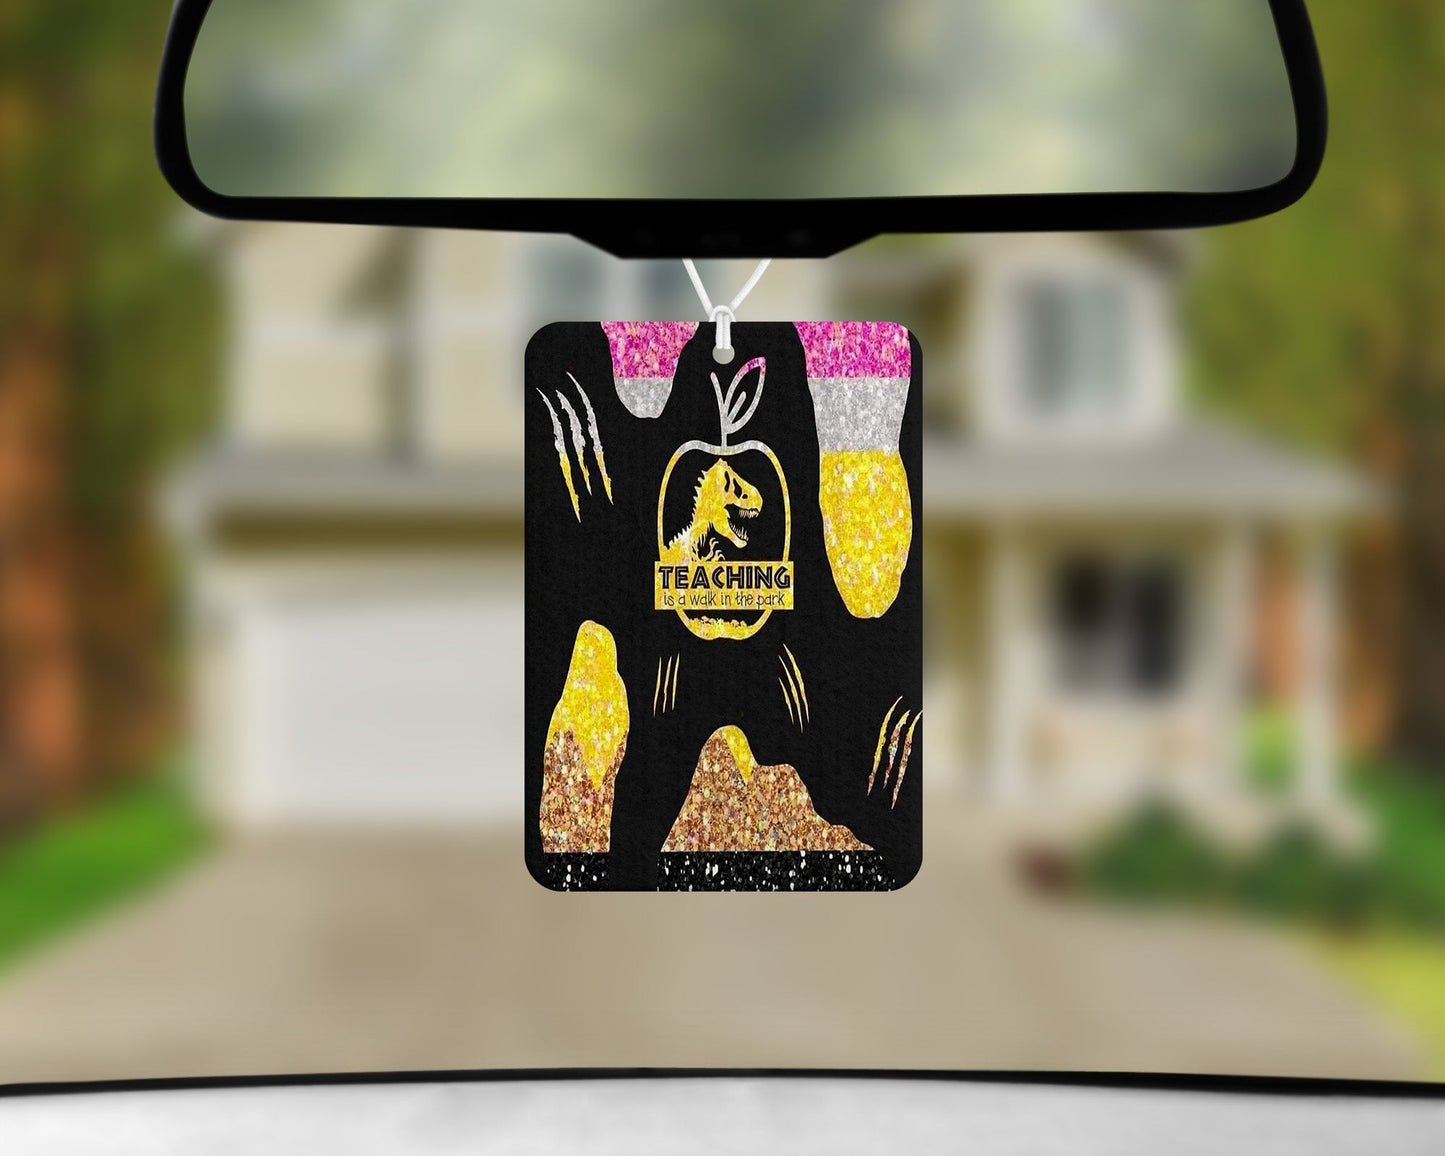 Teaching Is A Walk In The Park|Freshie|Includes Scent Bottle - Vehicle Air Freshener